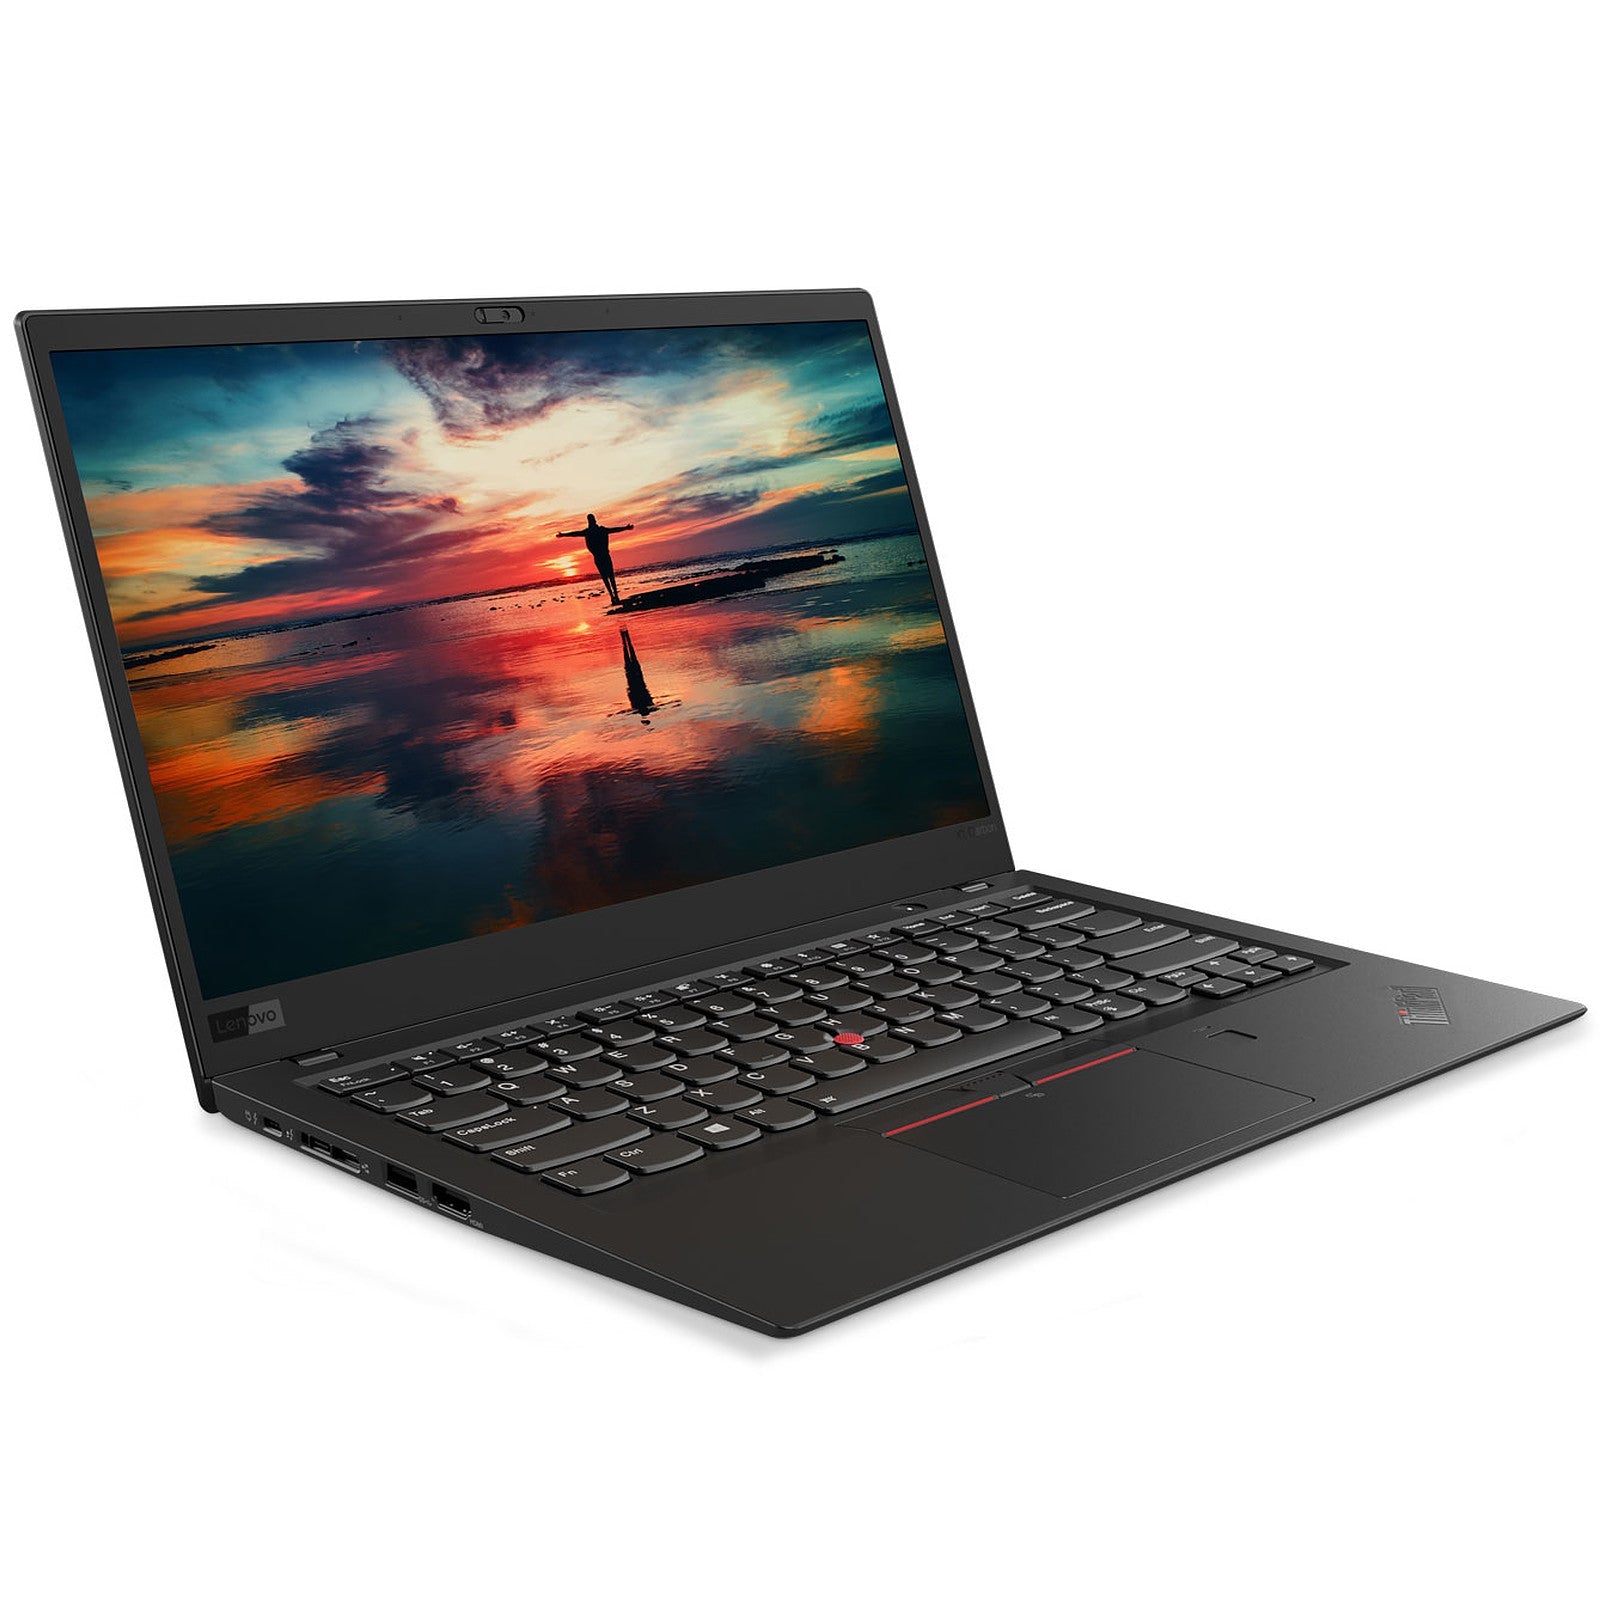 Lenovo ThinkPad X1 Carbon 6 gen Touch | i5 | 8GB | 256GB SSD  -  Brugt - Meget god stand